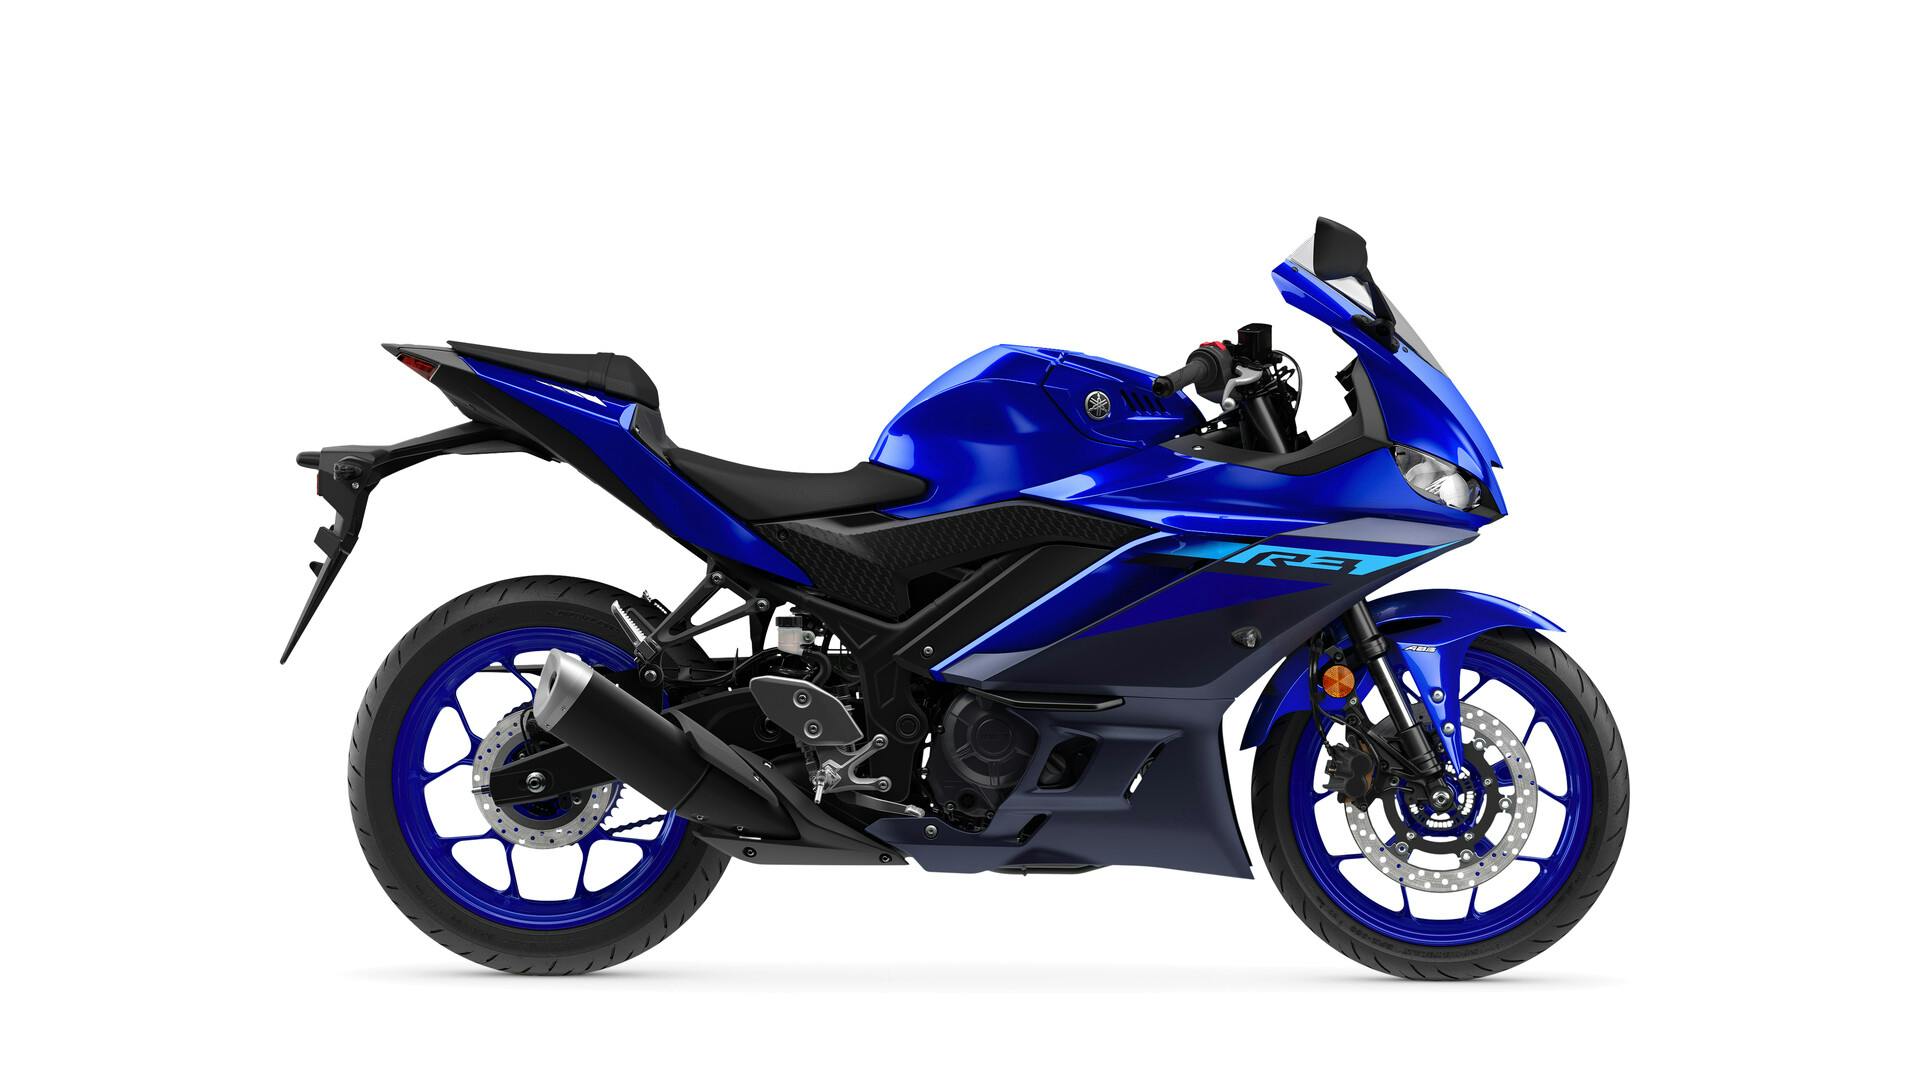 Yamaha YZF-R3 in icon blue colour